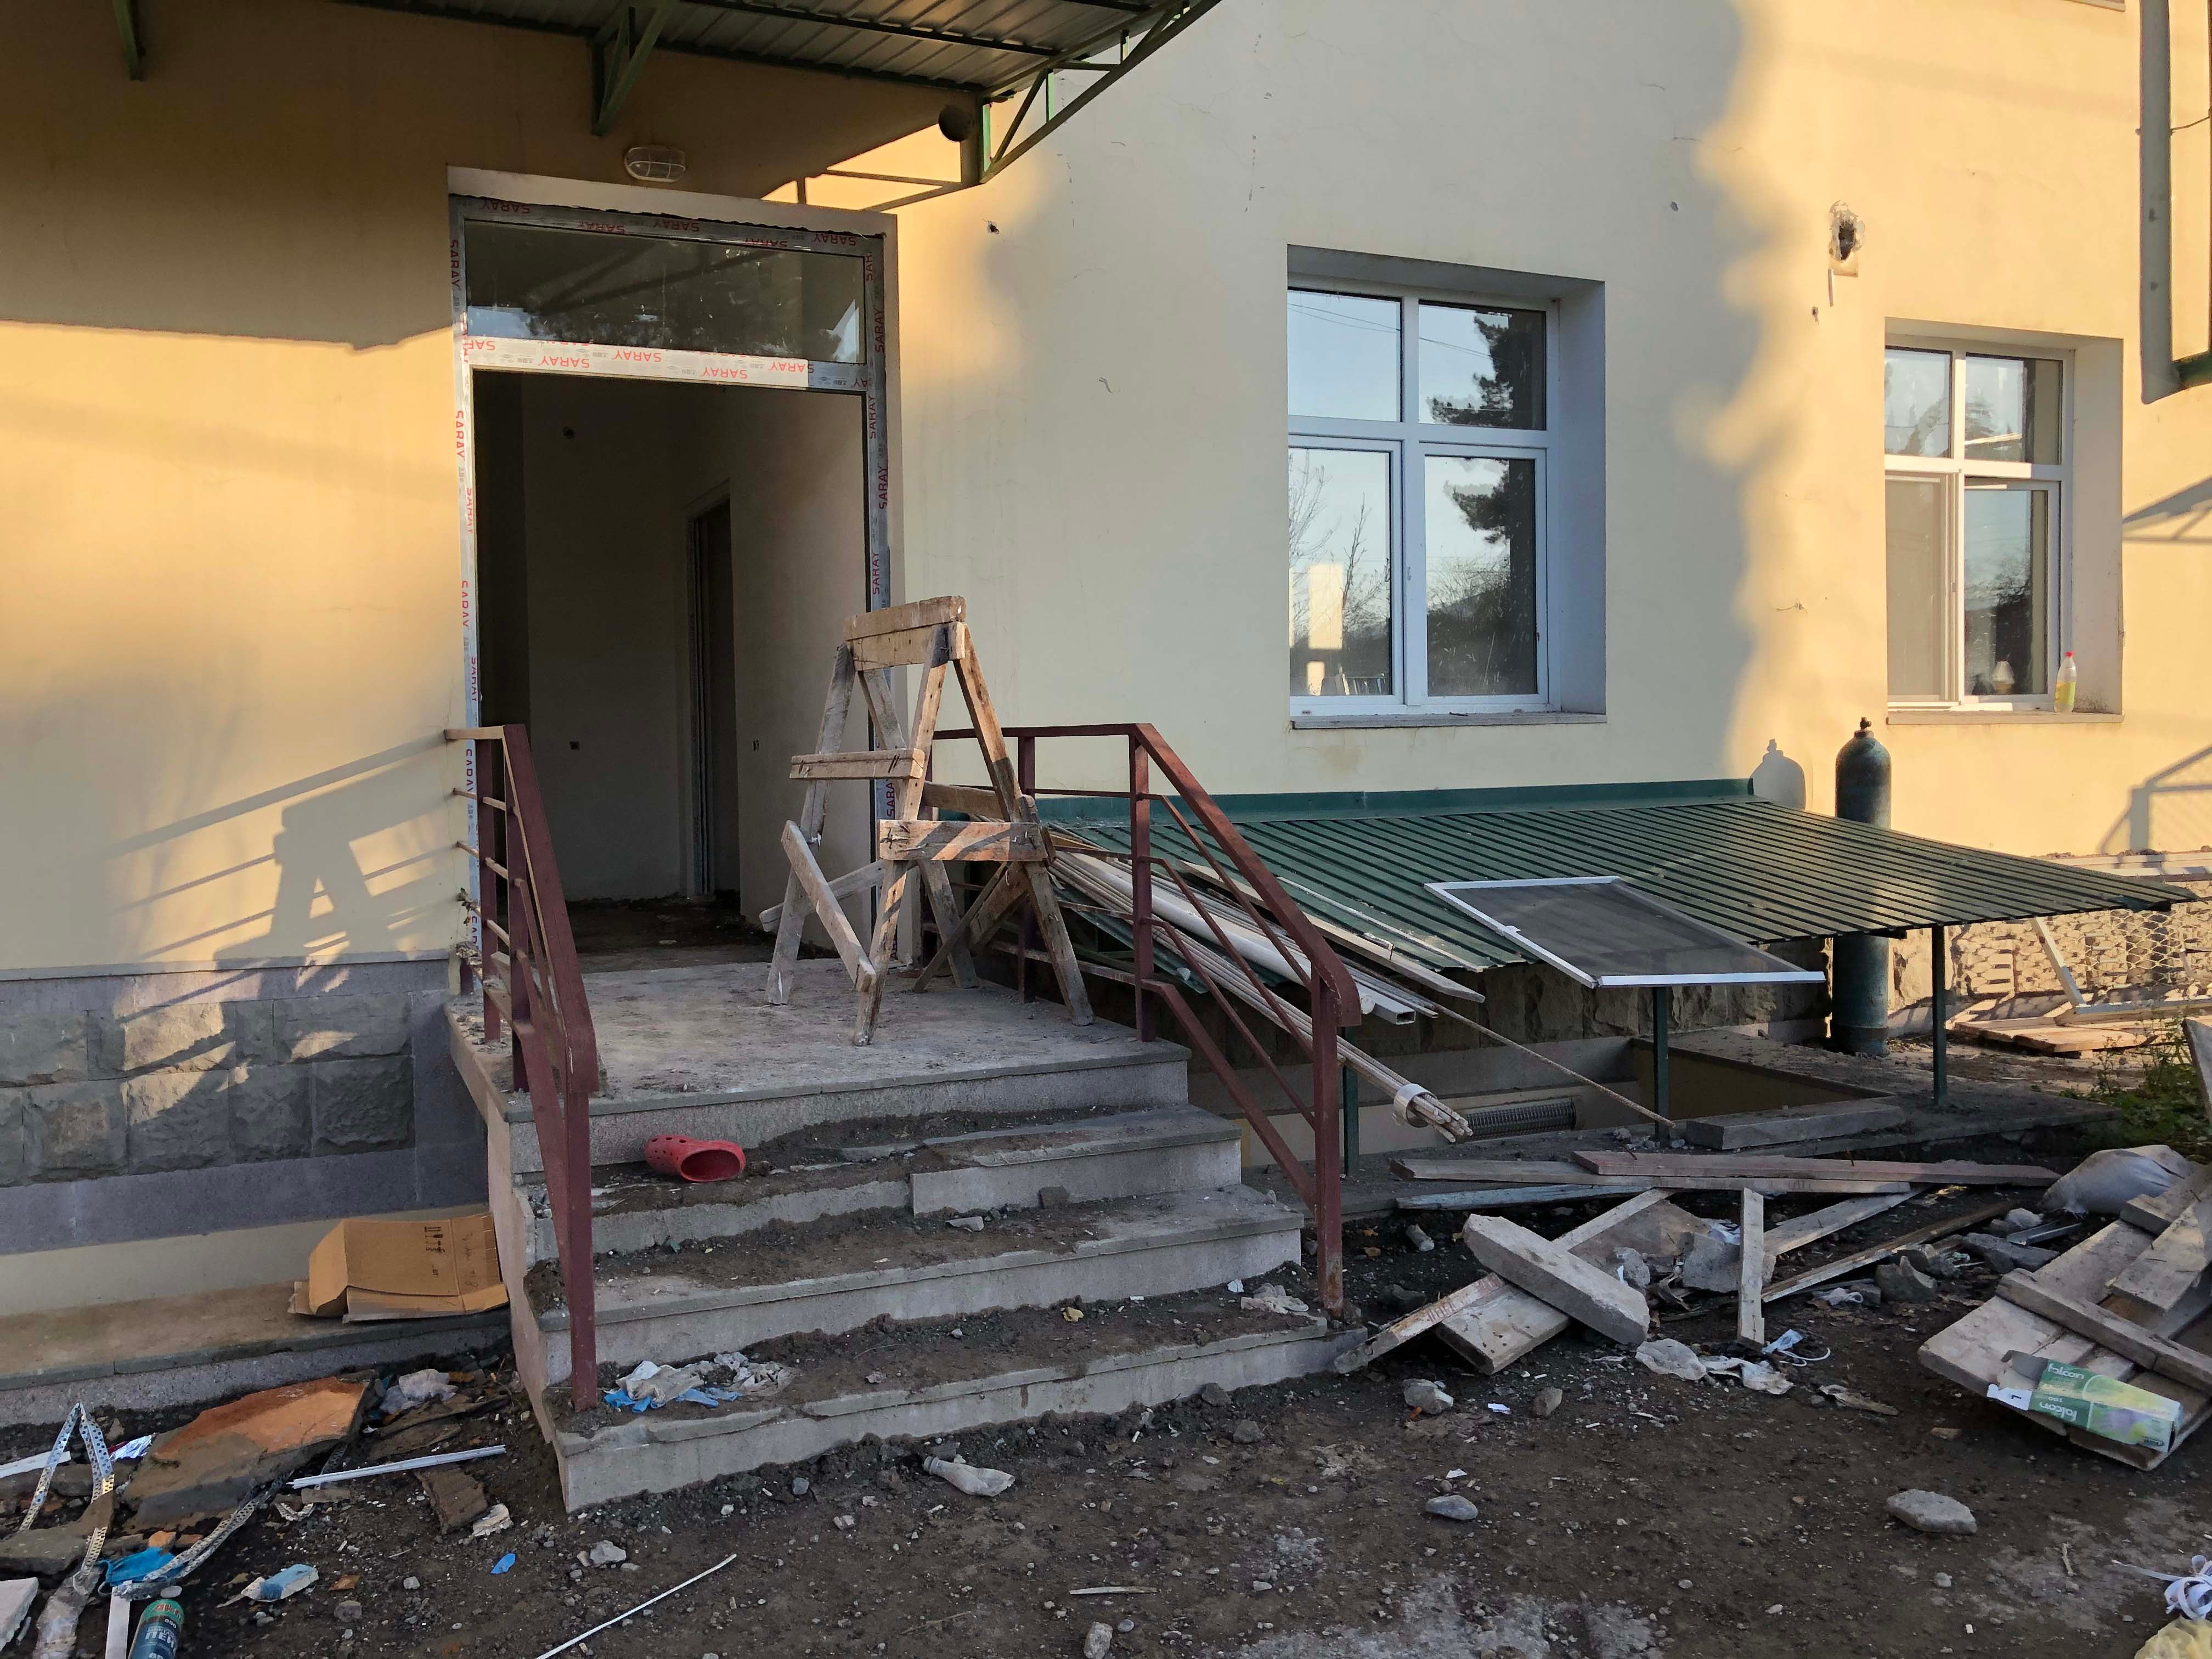 The front entrance to the public hospital in Martakert, which suffered significant damage as a result of multiple strikes by Azerbaijani forces between September and November 2020.